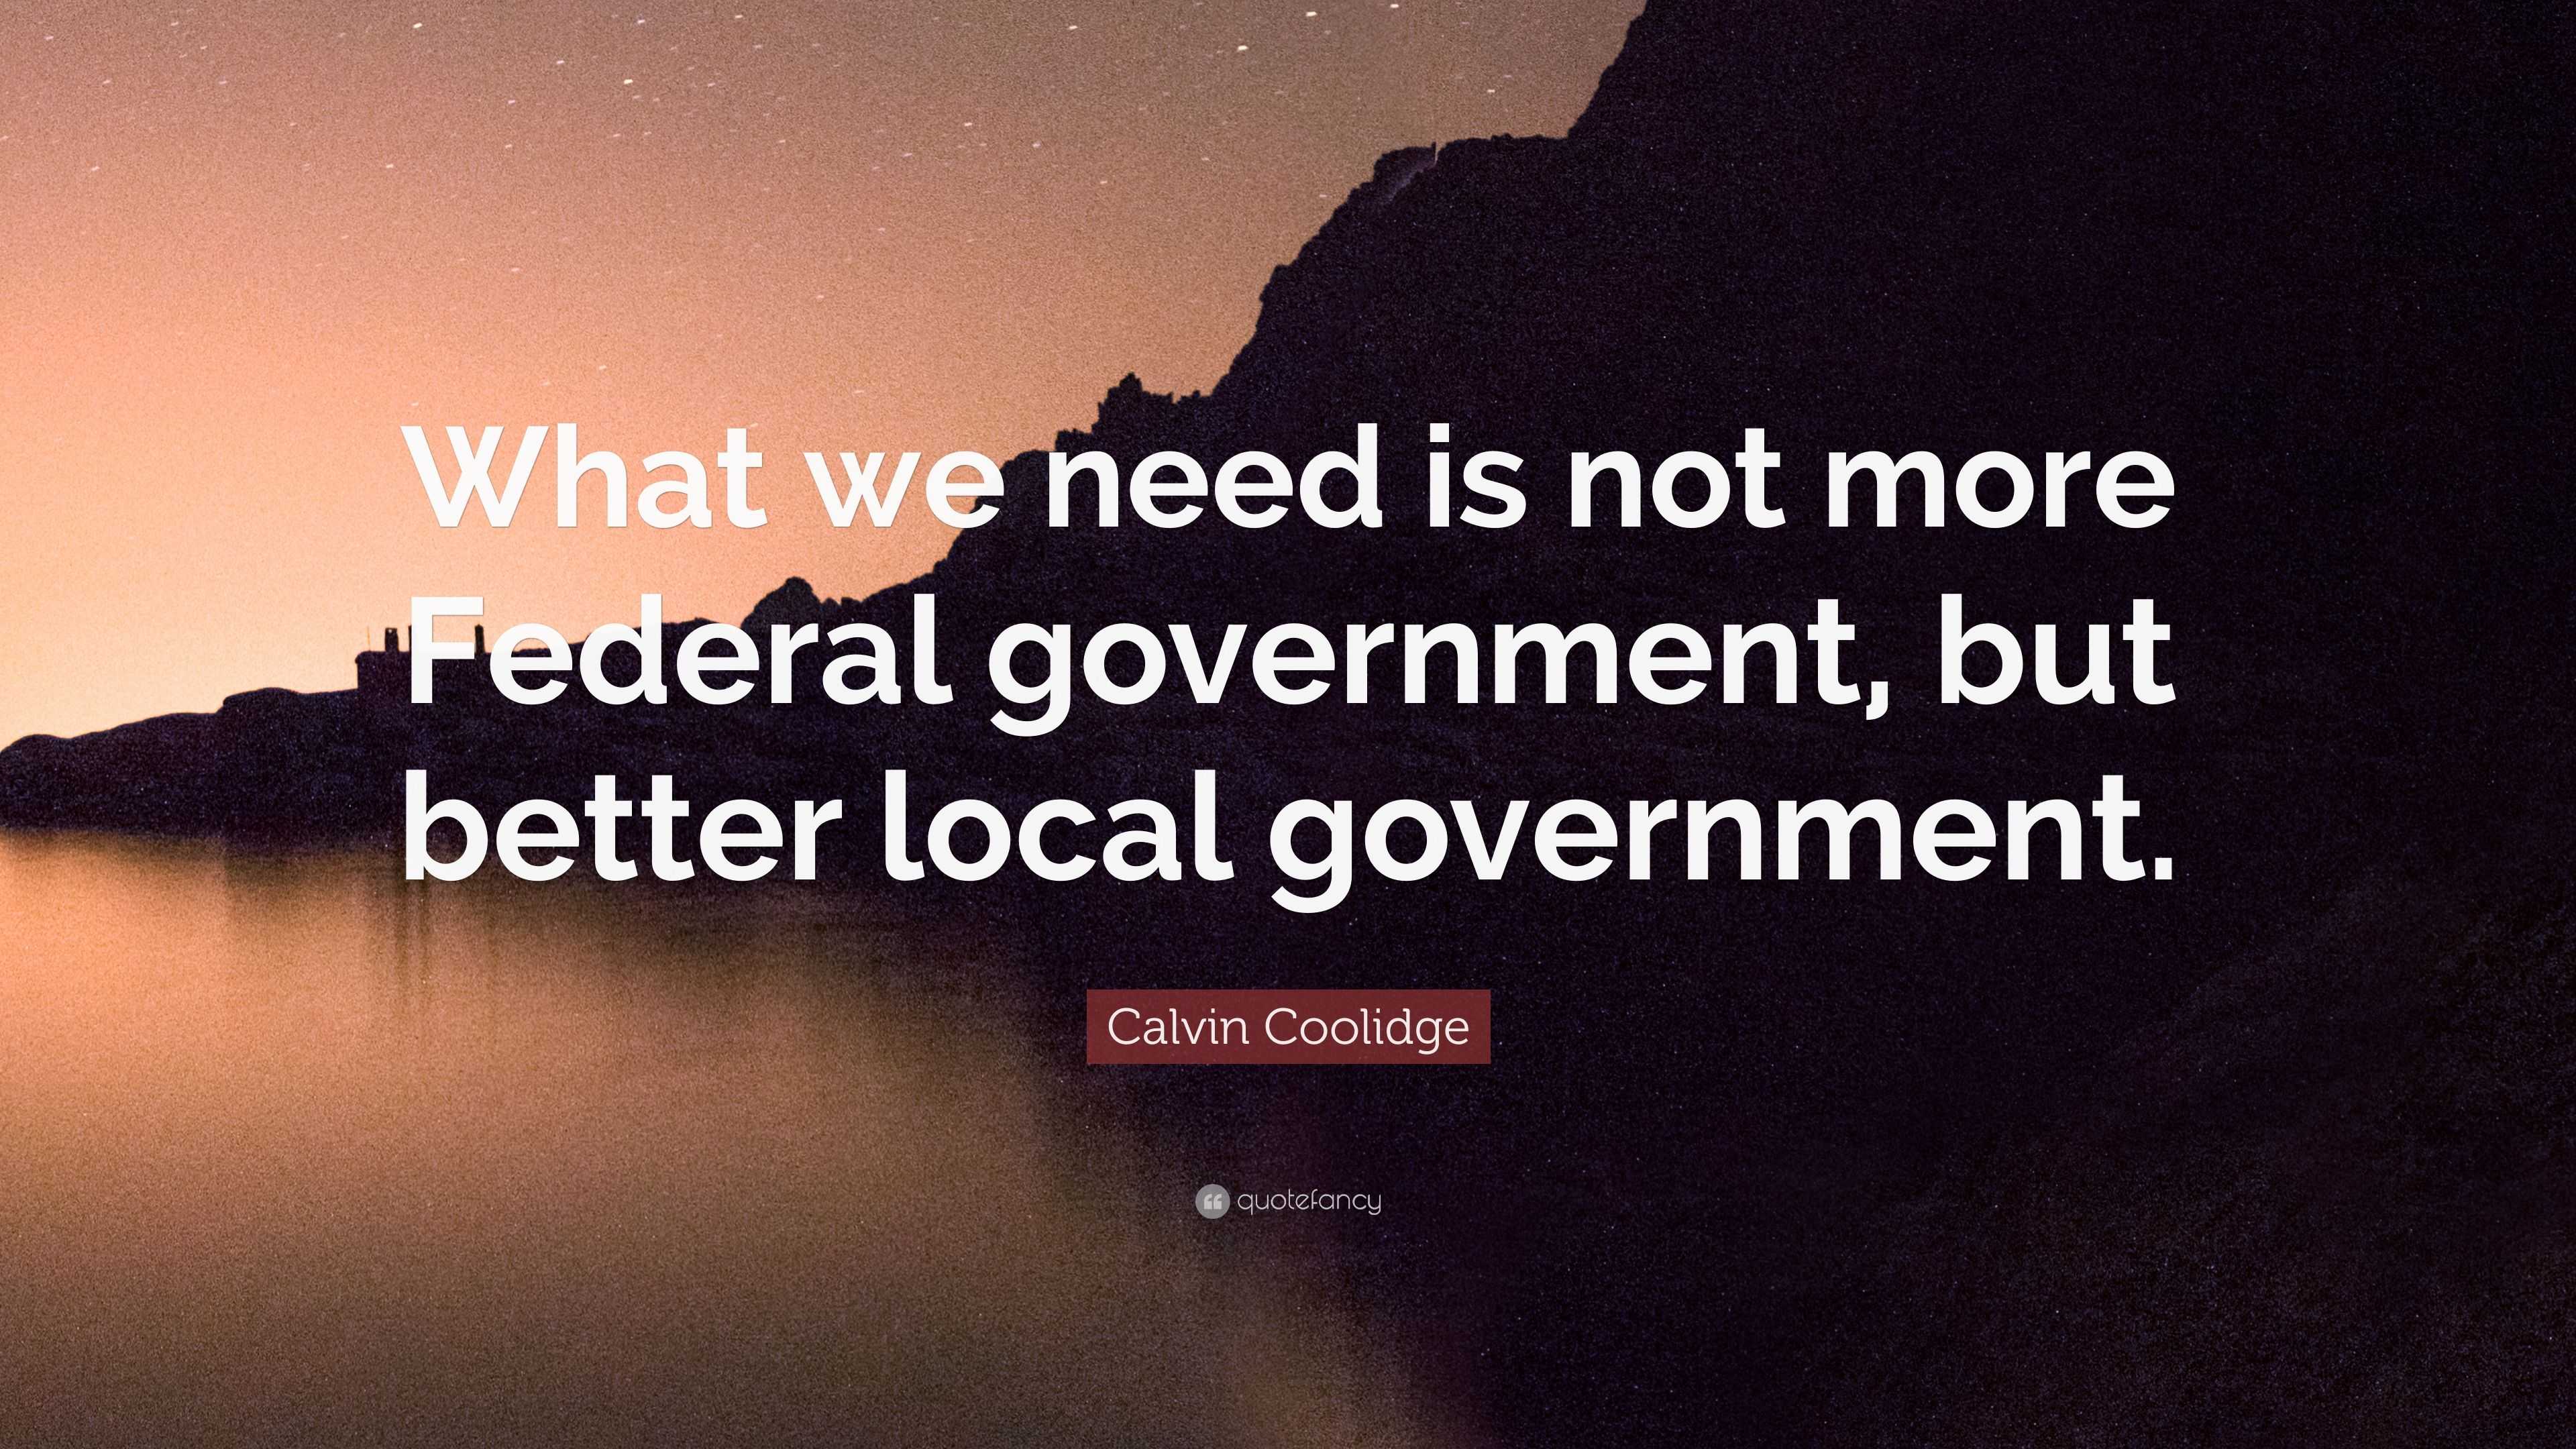 3513971 Calvin Coolidge Quote What we need is not more Federal government